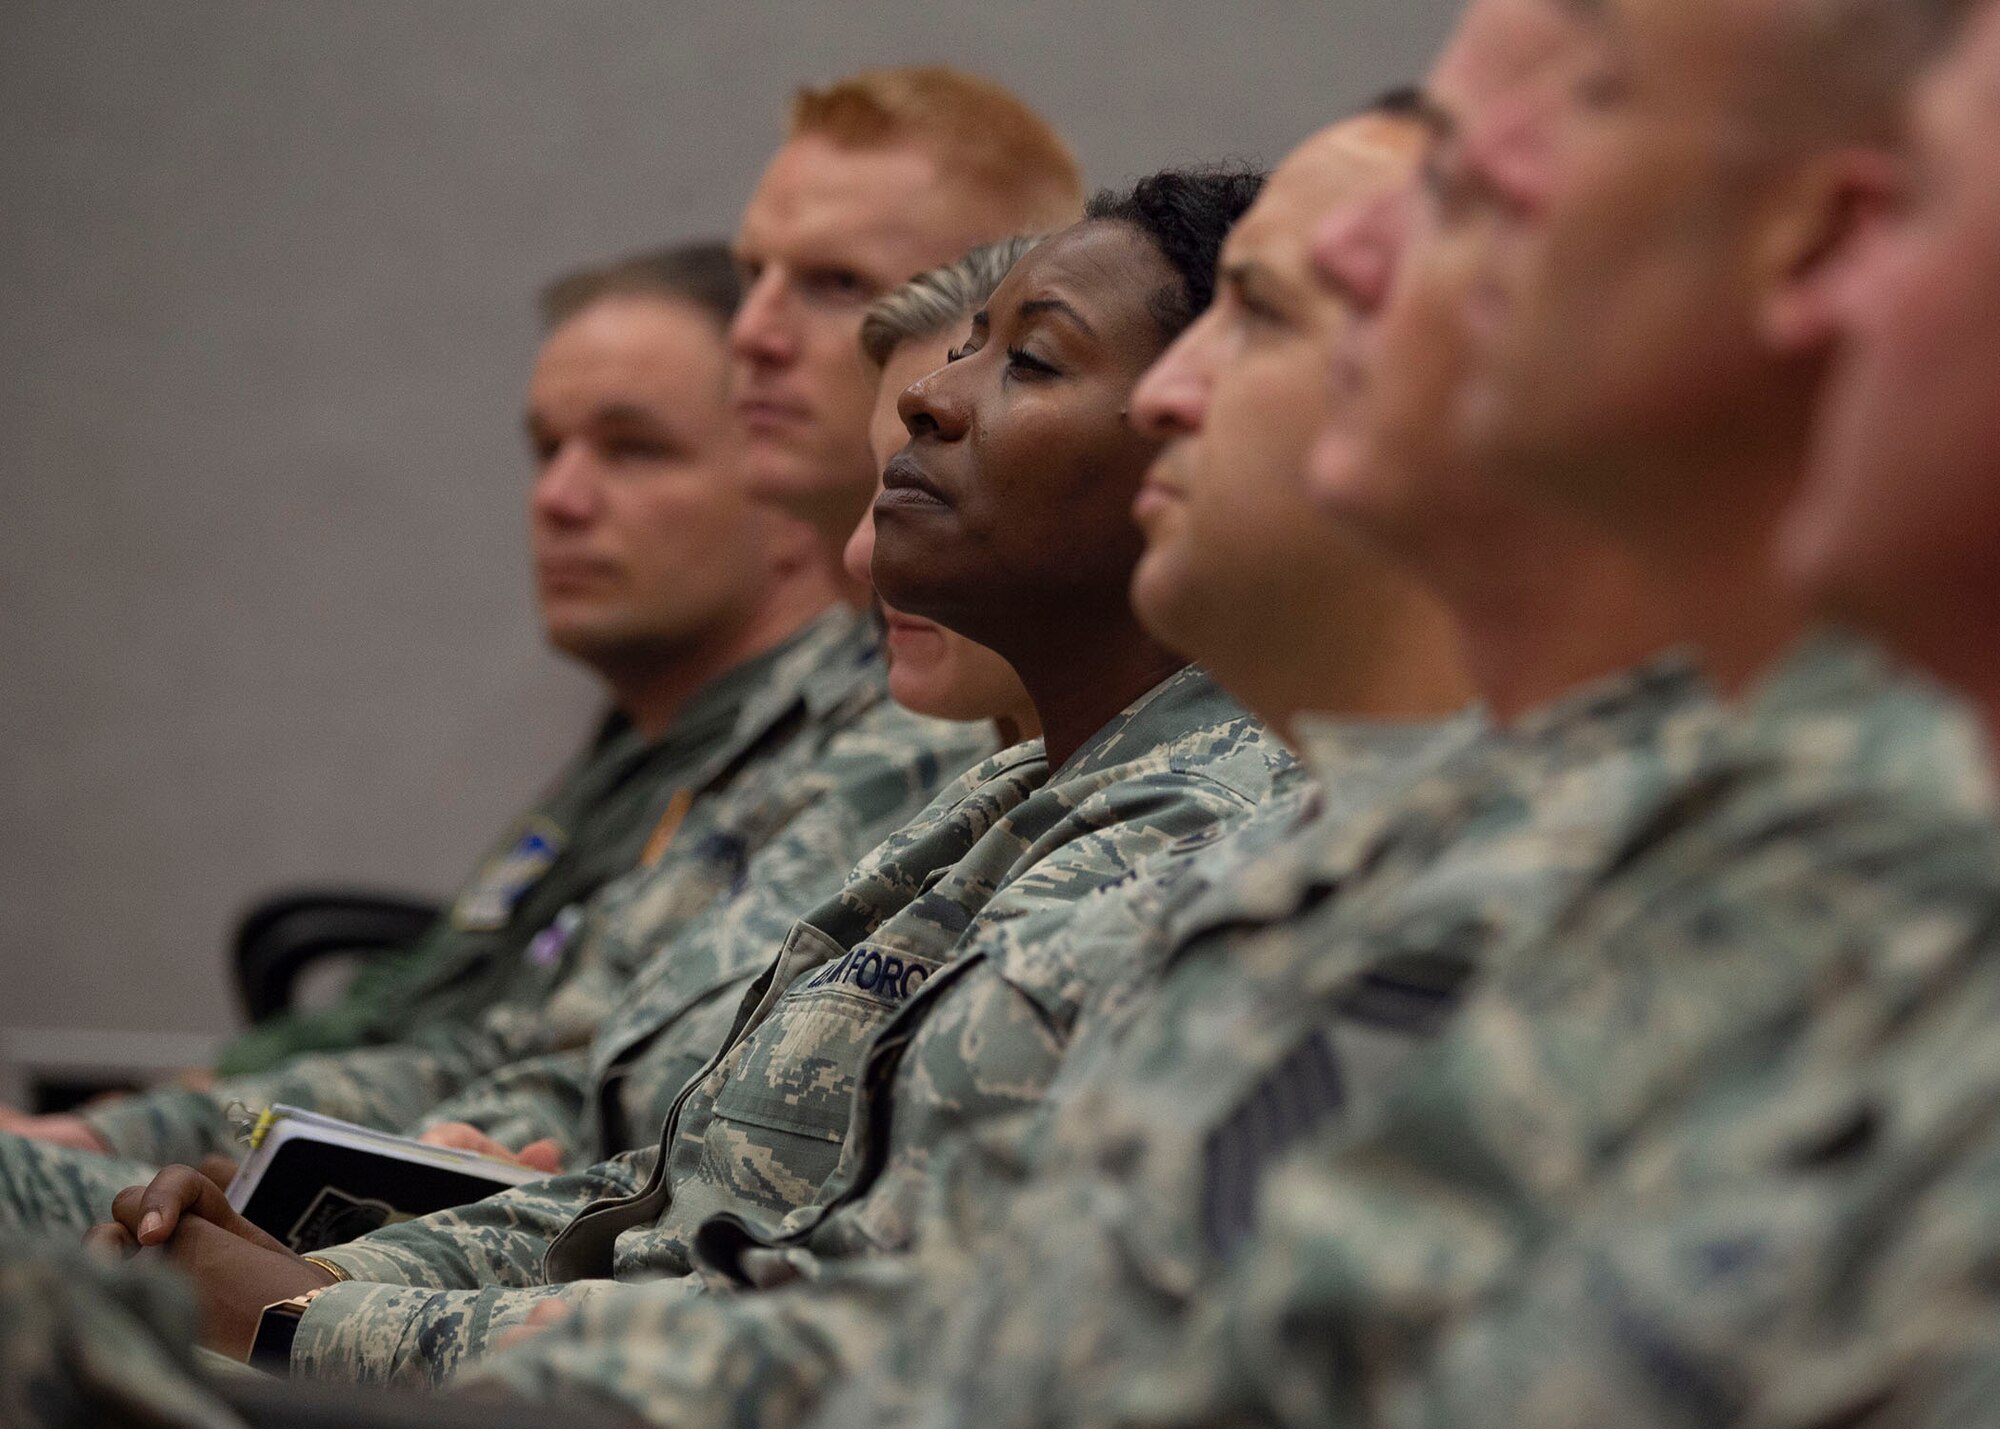 Senior leaders from the 15th Wing gather at the Hollister Auditorium to listen to Air Force Vice Chief of Staff Gen. Stephen W. Wilson during a meeting, Joint Base Pearl Harbor-Hickam, Hawaii, July 26, 2018.  Wilson visited Airmen from around the 15th Wing after the Pacific Air Forces change of command ceremony to discuss the importance of modernization, readiness, innovation and revitalizing squadrons. (U.S. Air Force photo by Tech. Sgt. Heather Redman)